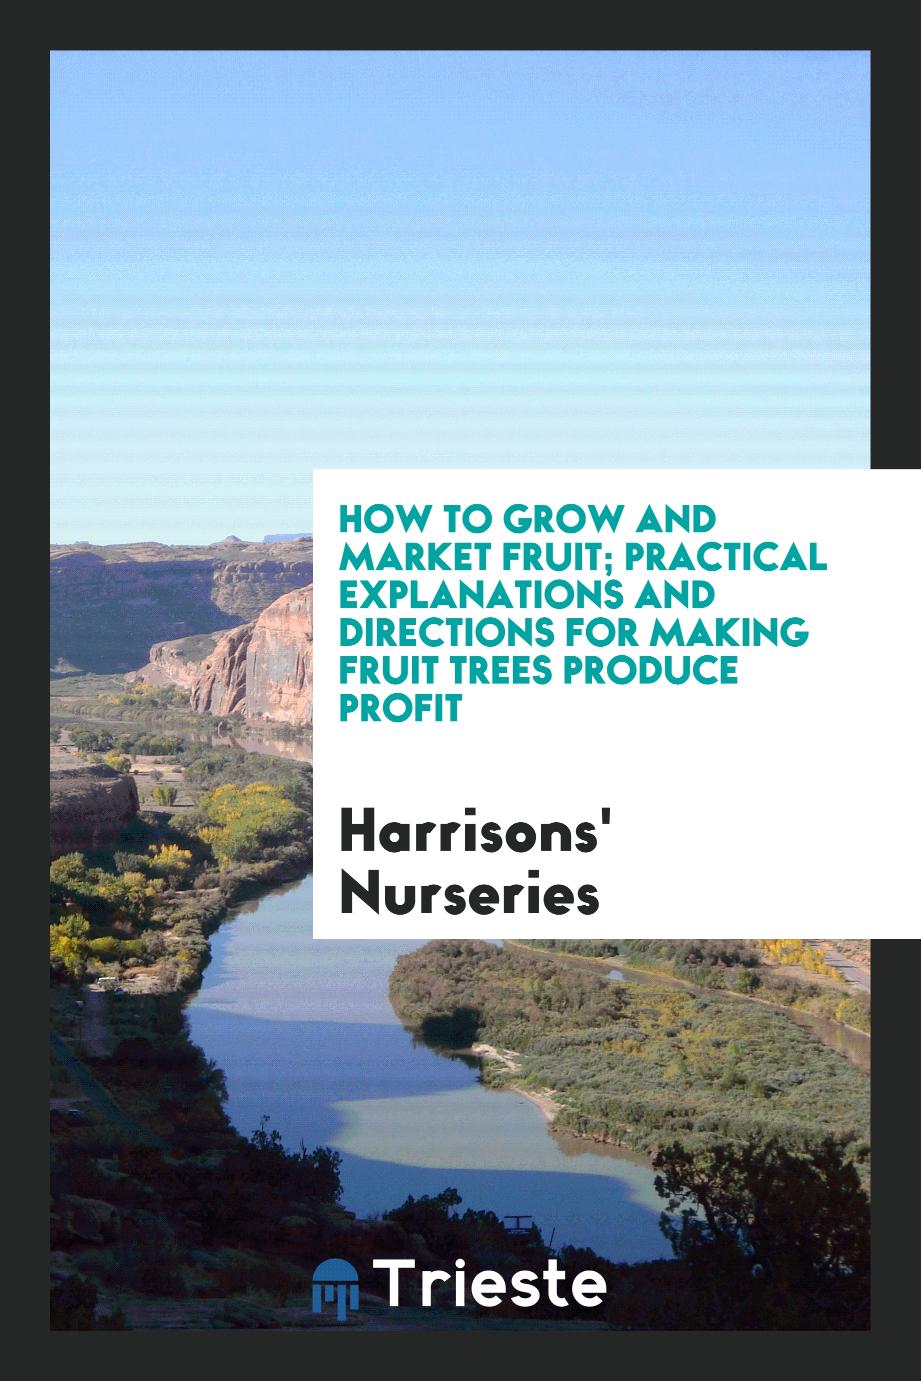 How to Grow and Market Fruit; Practical Explanations and Directions for Making Fruit Trees Produce Profit